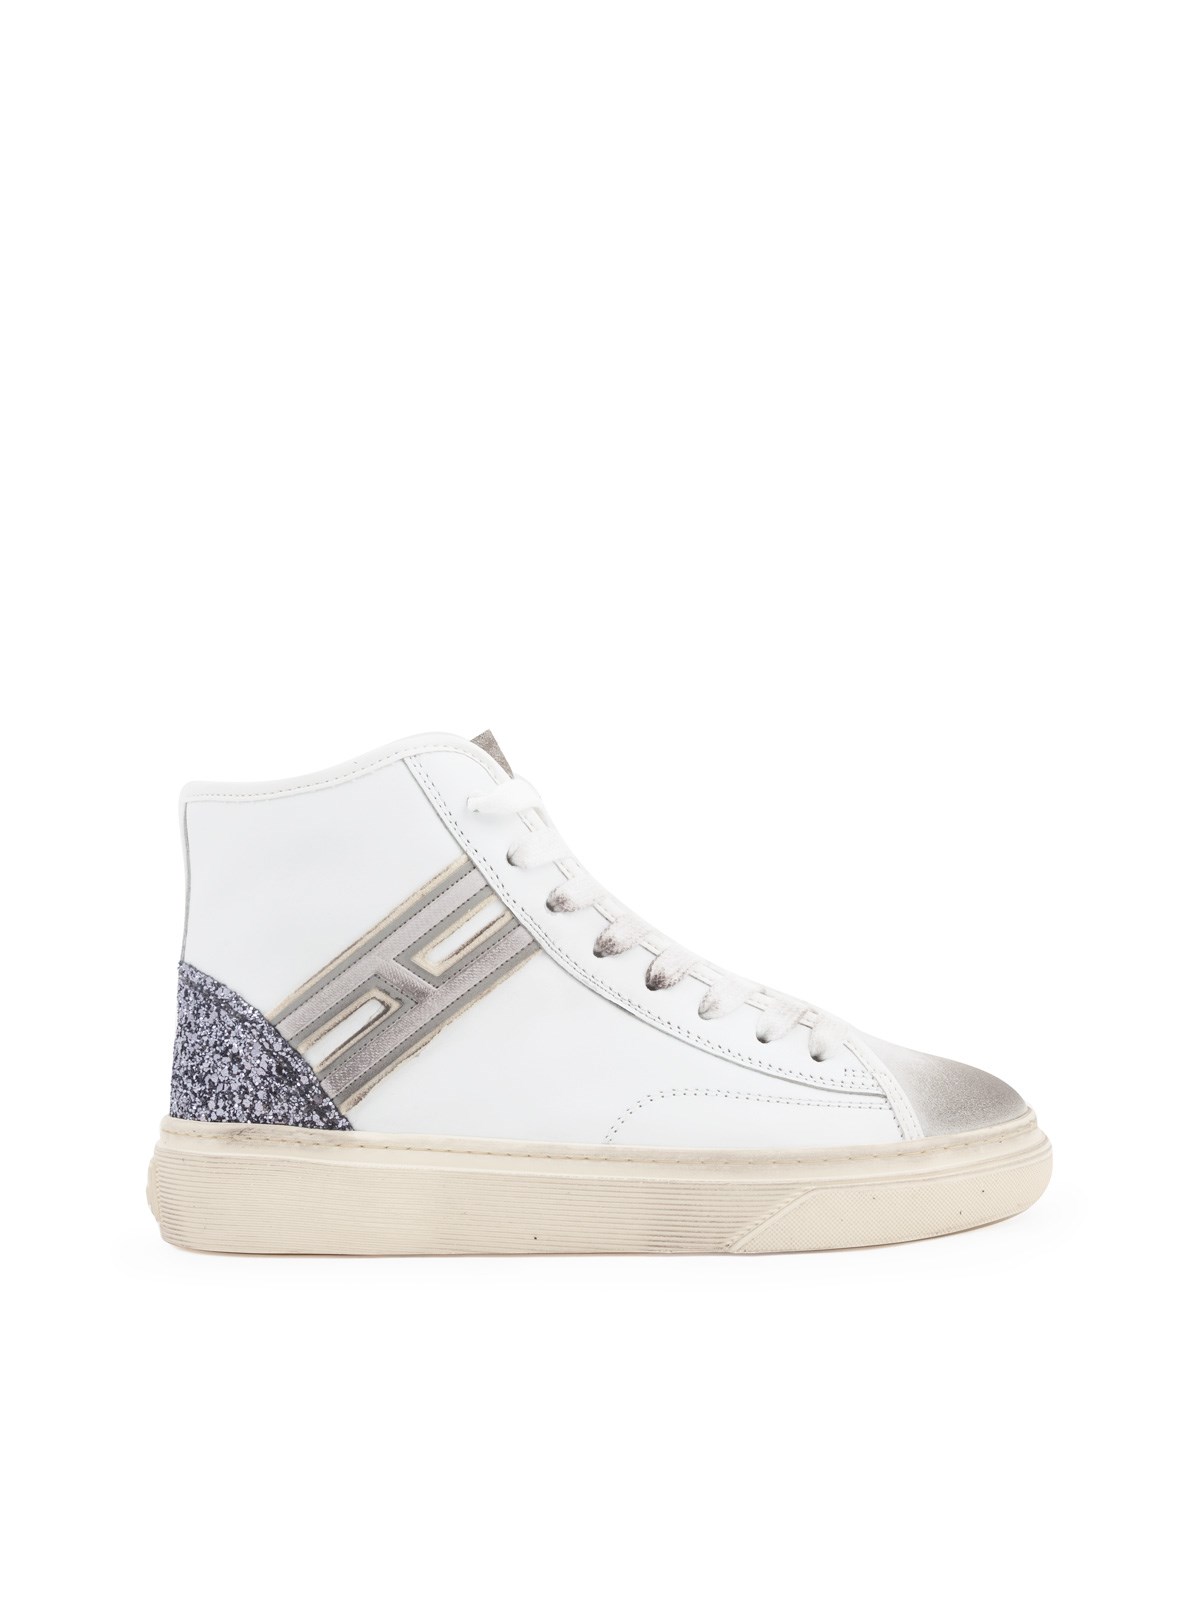 Ongehoorzaamheid Spin Aanpassing hogan LACE-UP HI TOPS SNEAKERS WITH GLITTER DETAIL available on  montiboutique.com - 20782